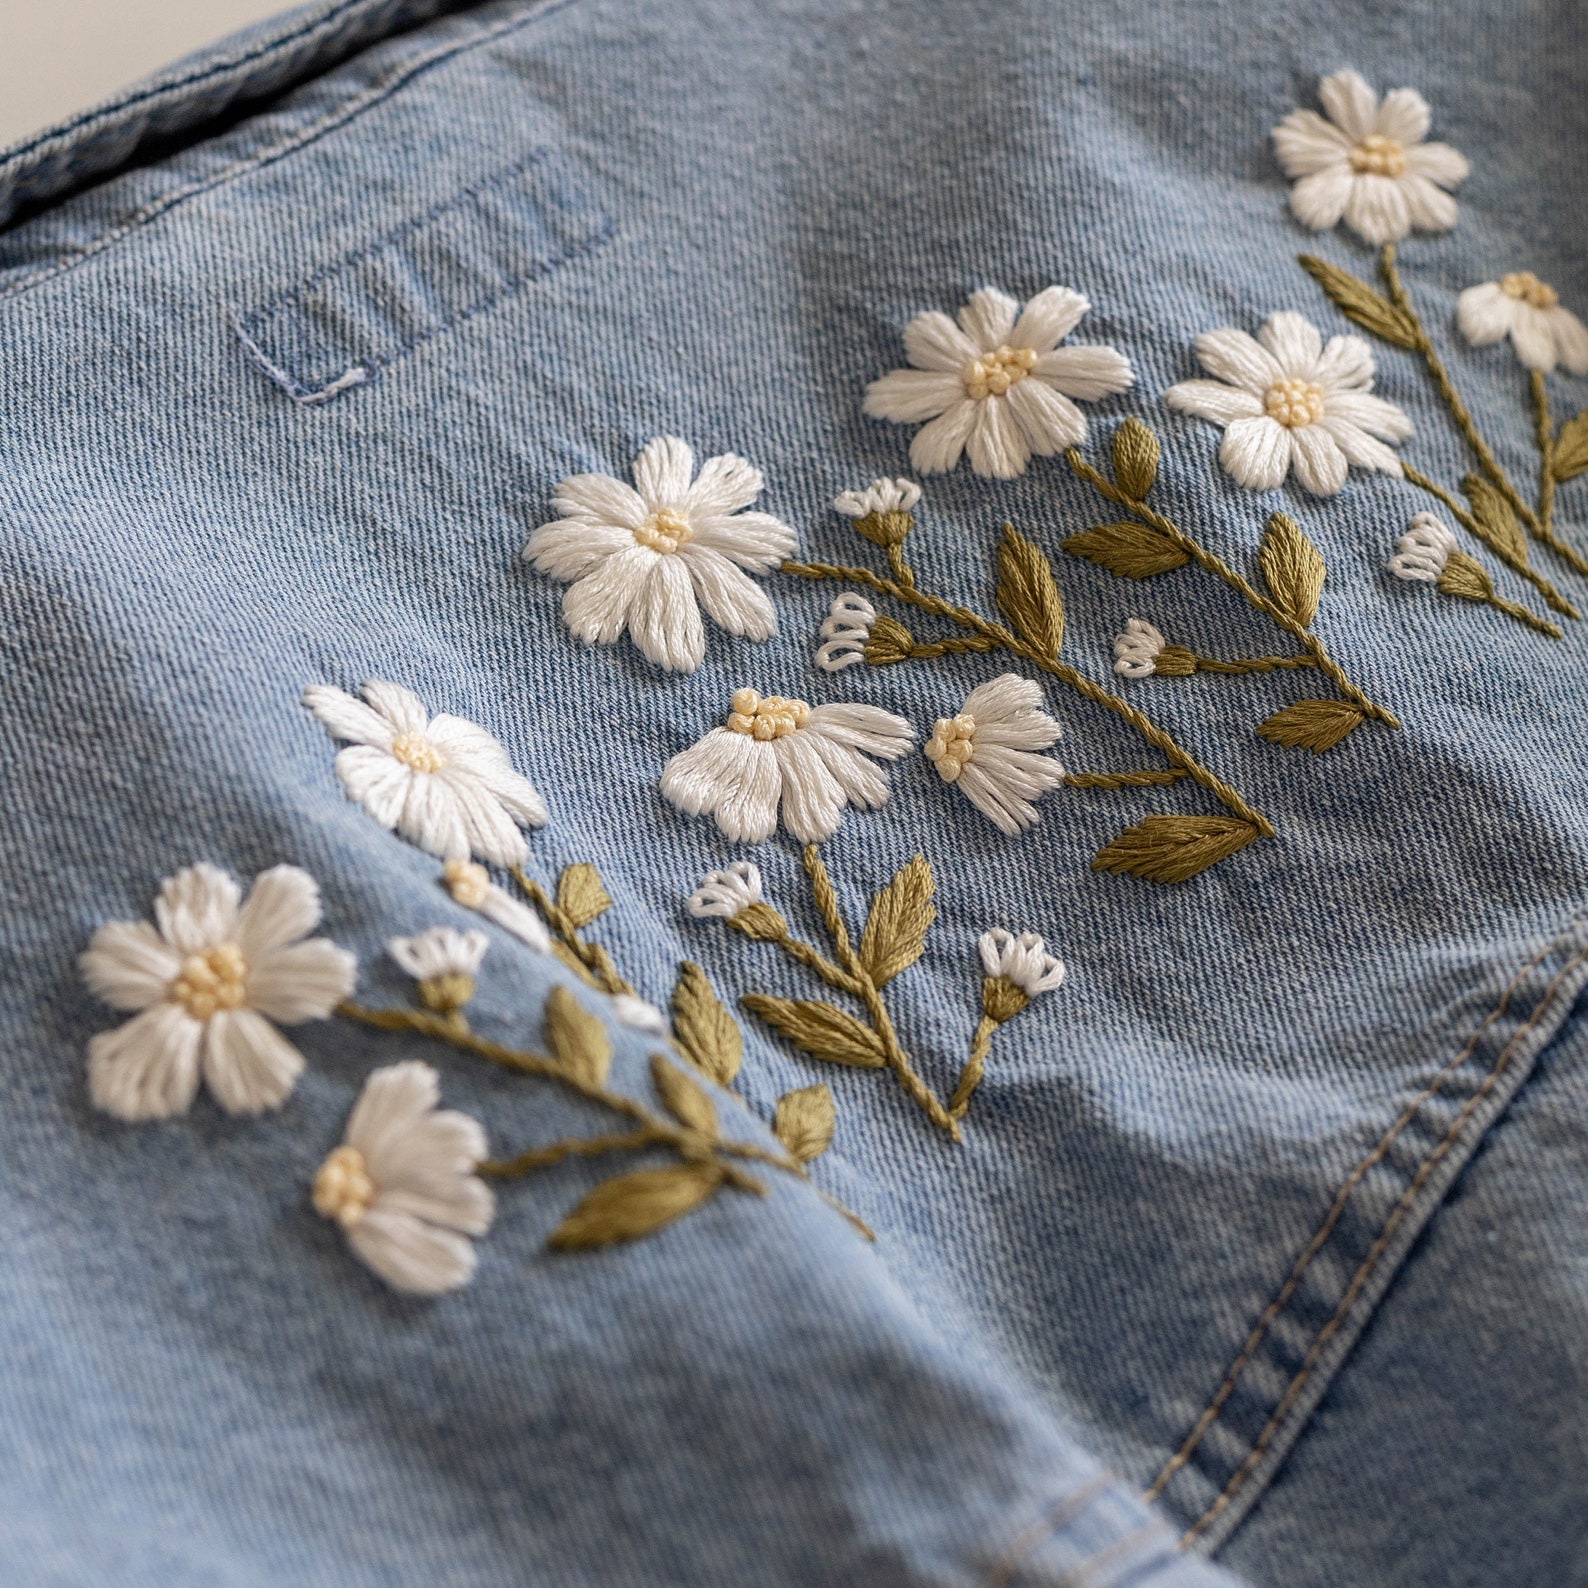 Floral Embroidery Pattern Beginner Embroidery PDF Pattern - Etsy